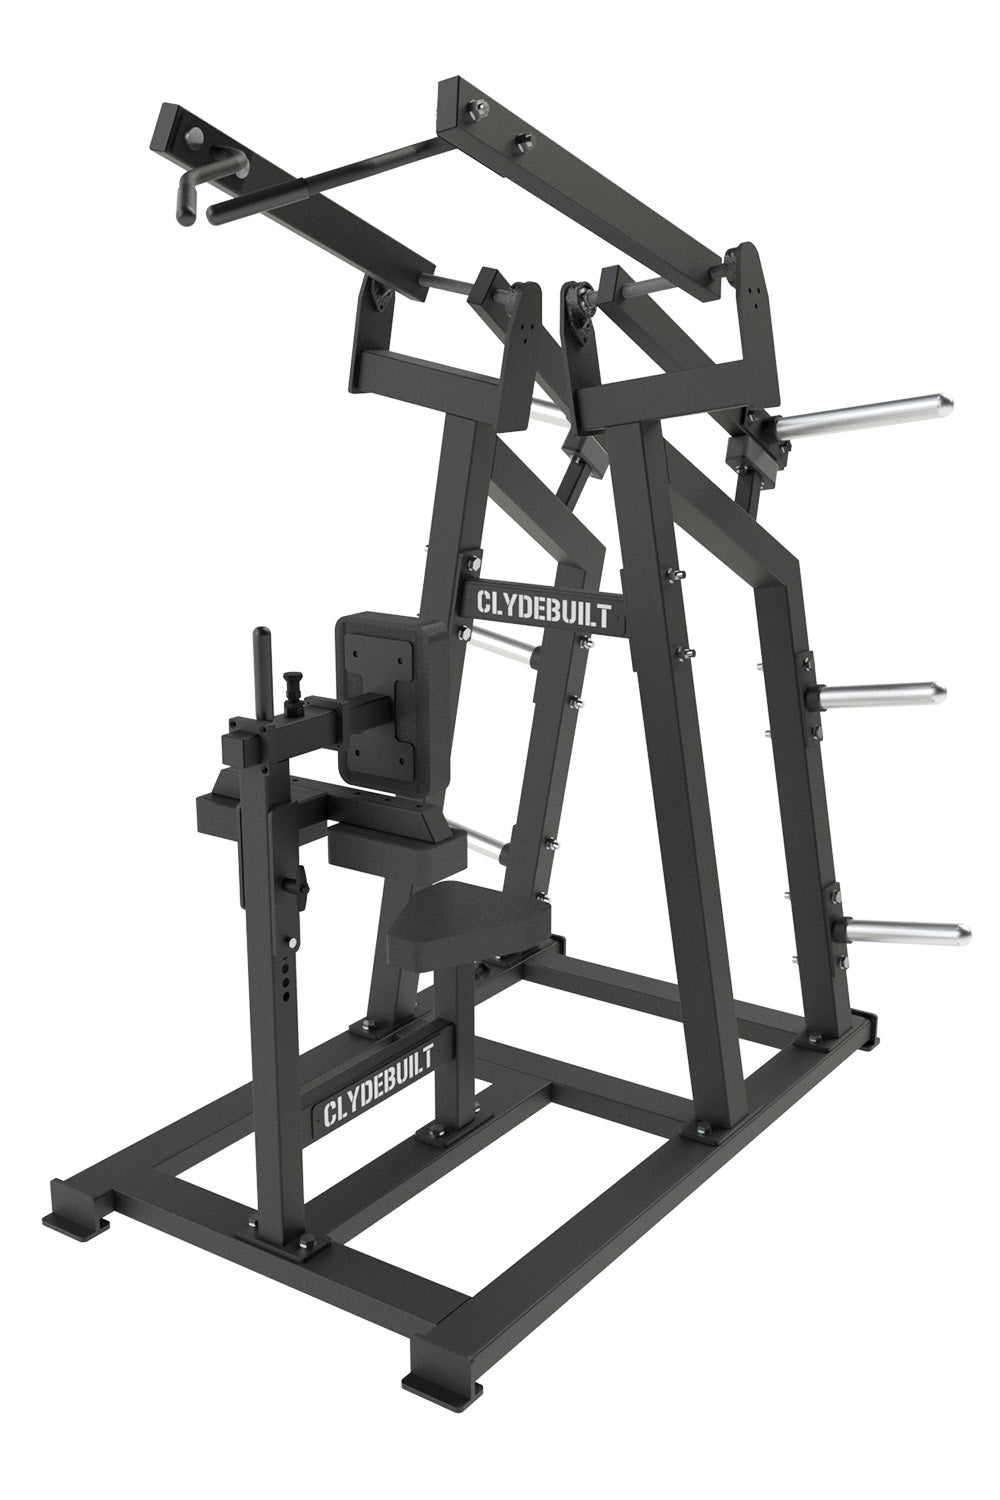 CLYDEBUILT TITAN ISO PLATE LOADED FORWARD FACING LAT PULL DOWN